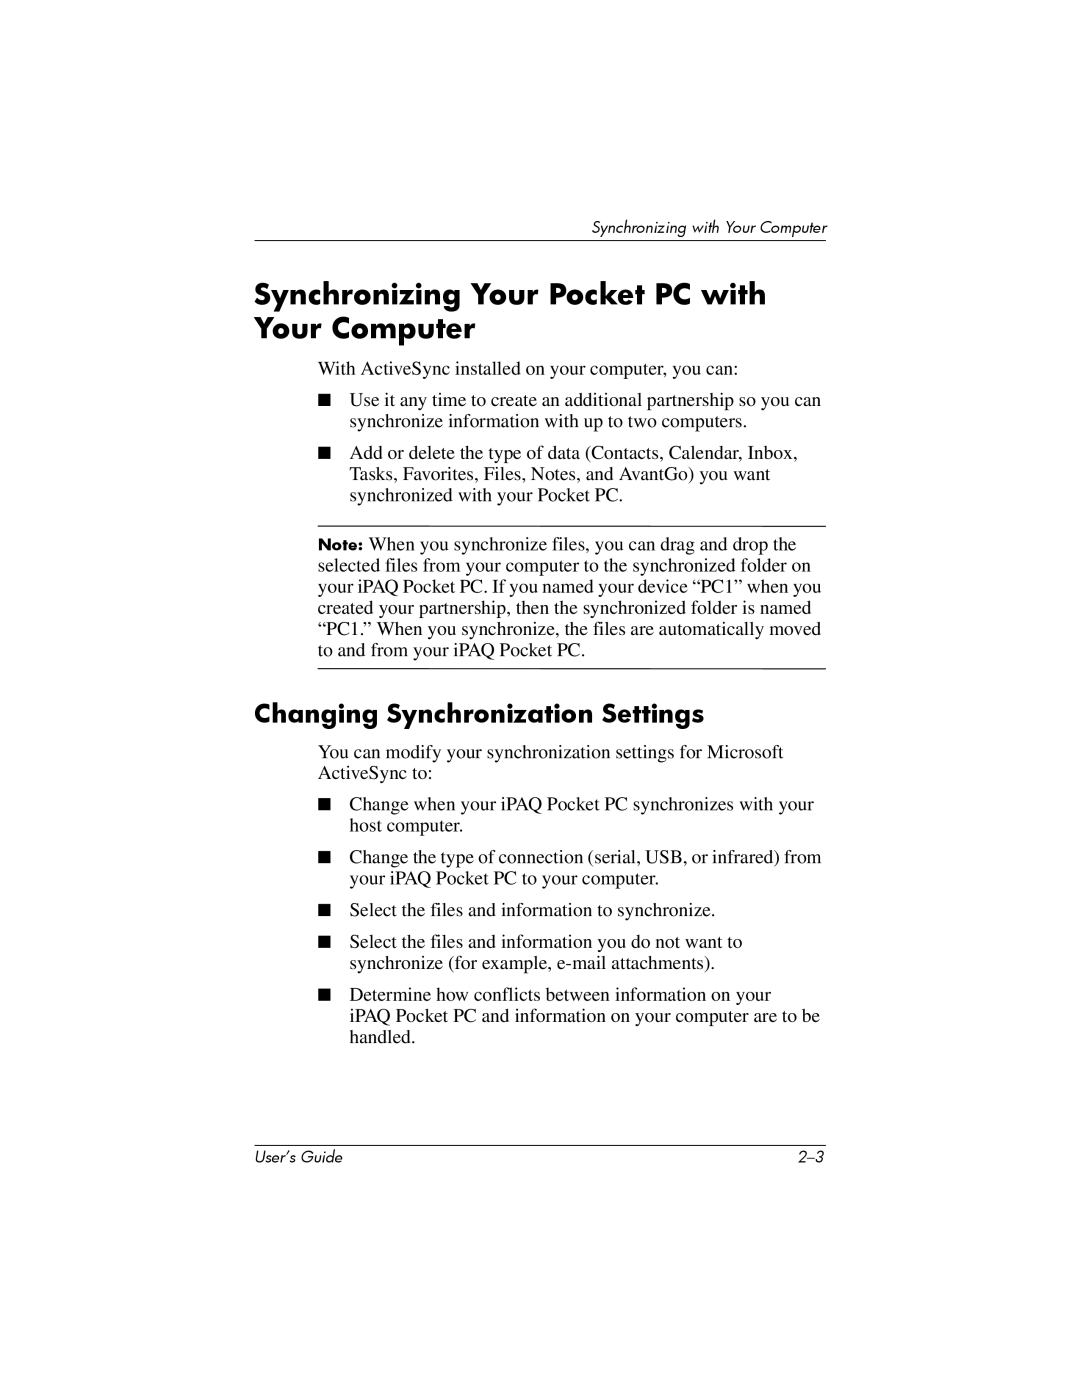 HP hx4700 manual Synchronizing Your Pocket PC with Your Computer, Changing Synchronization Settings 